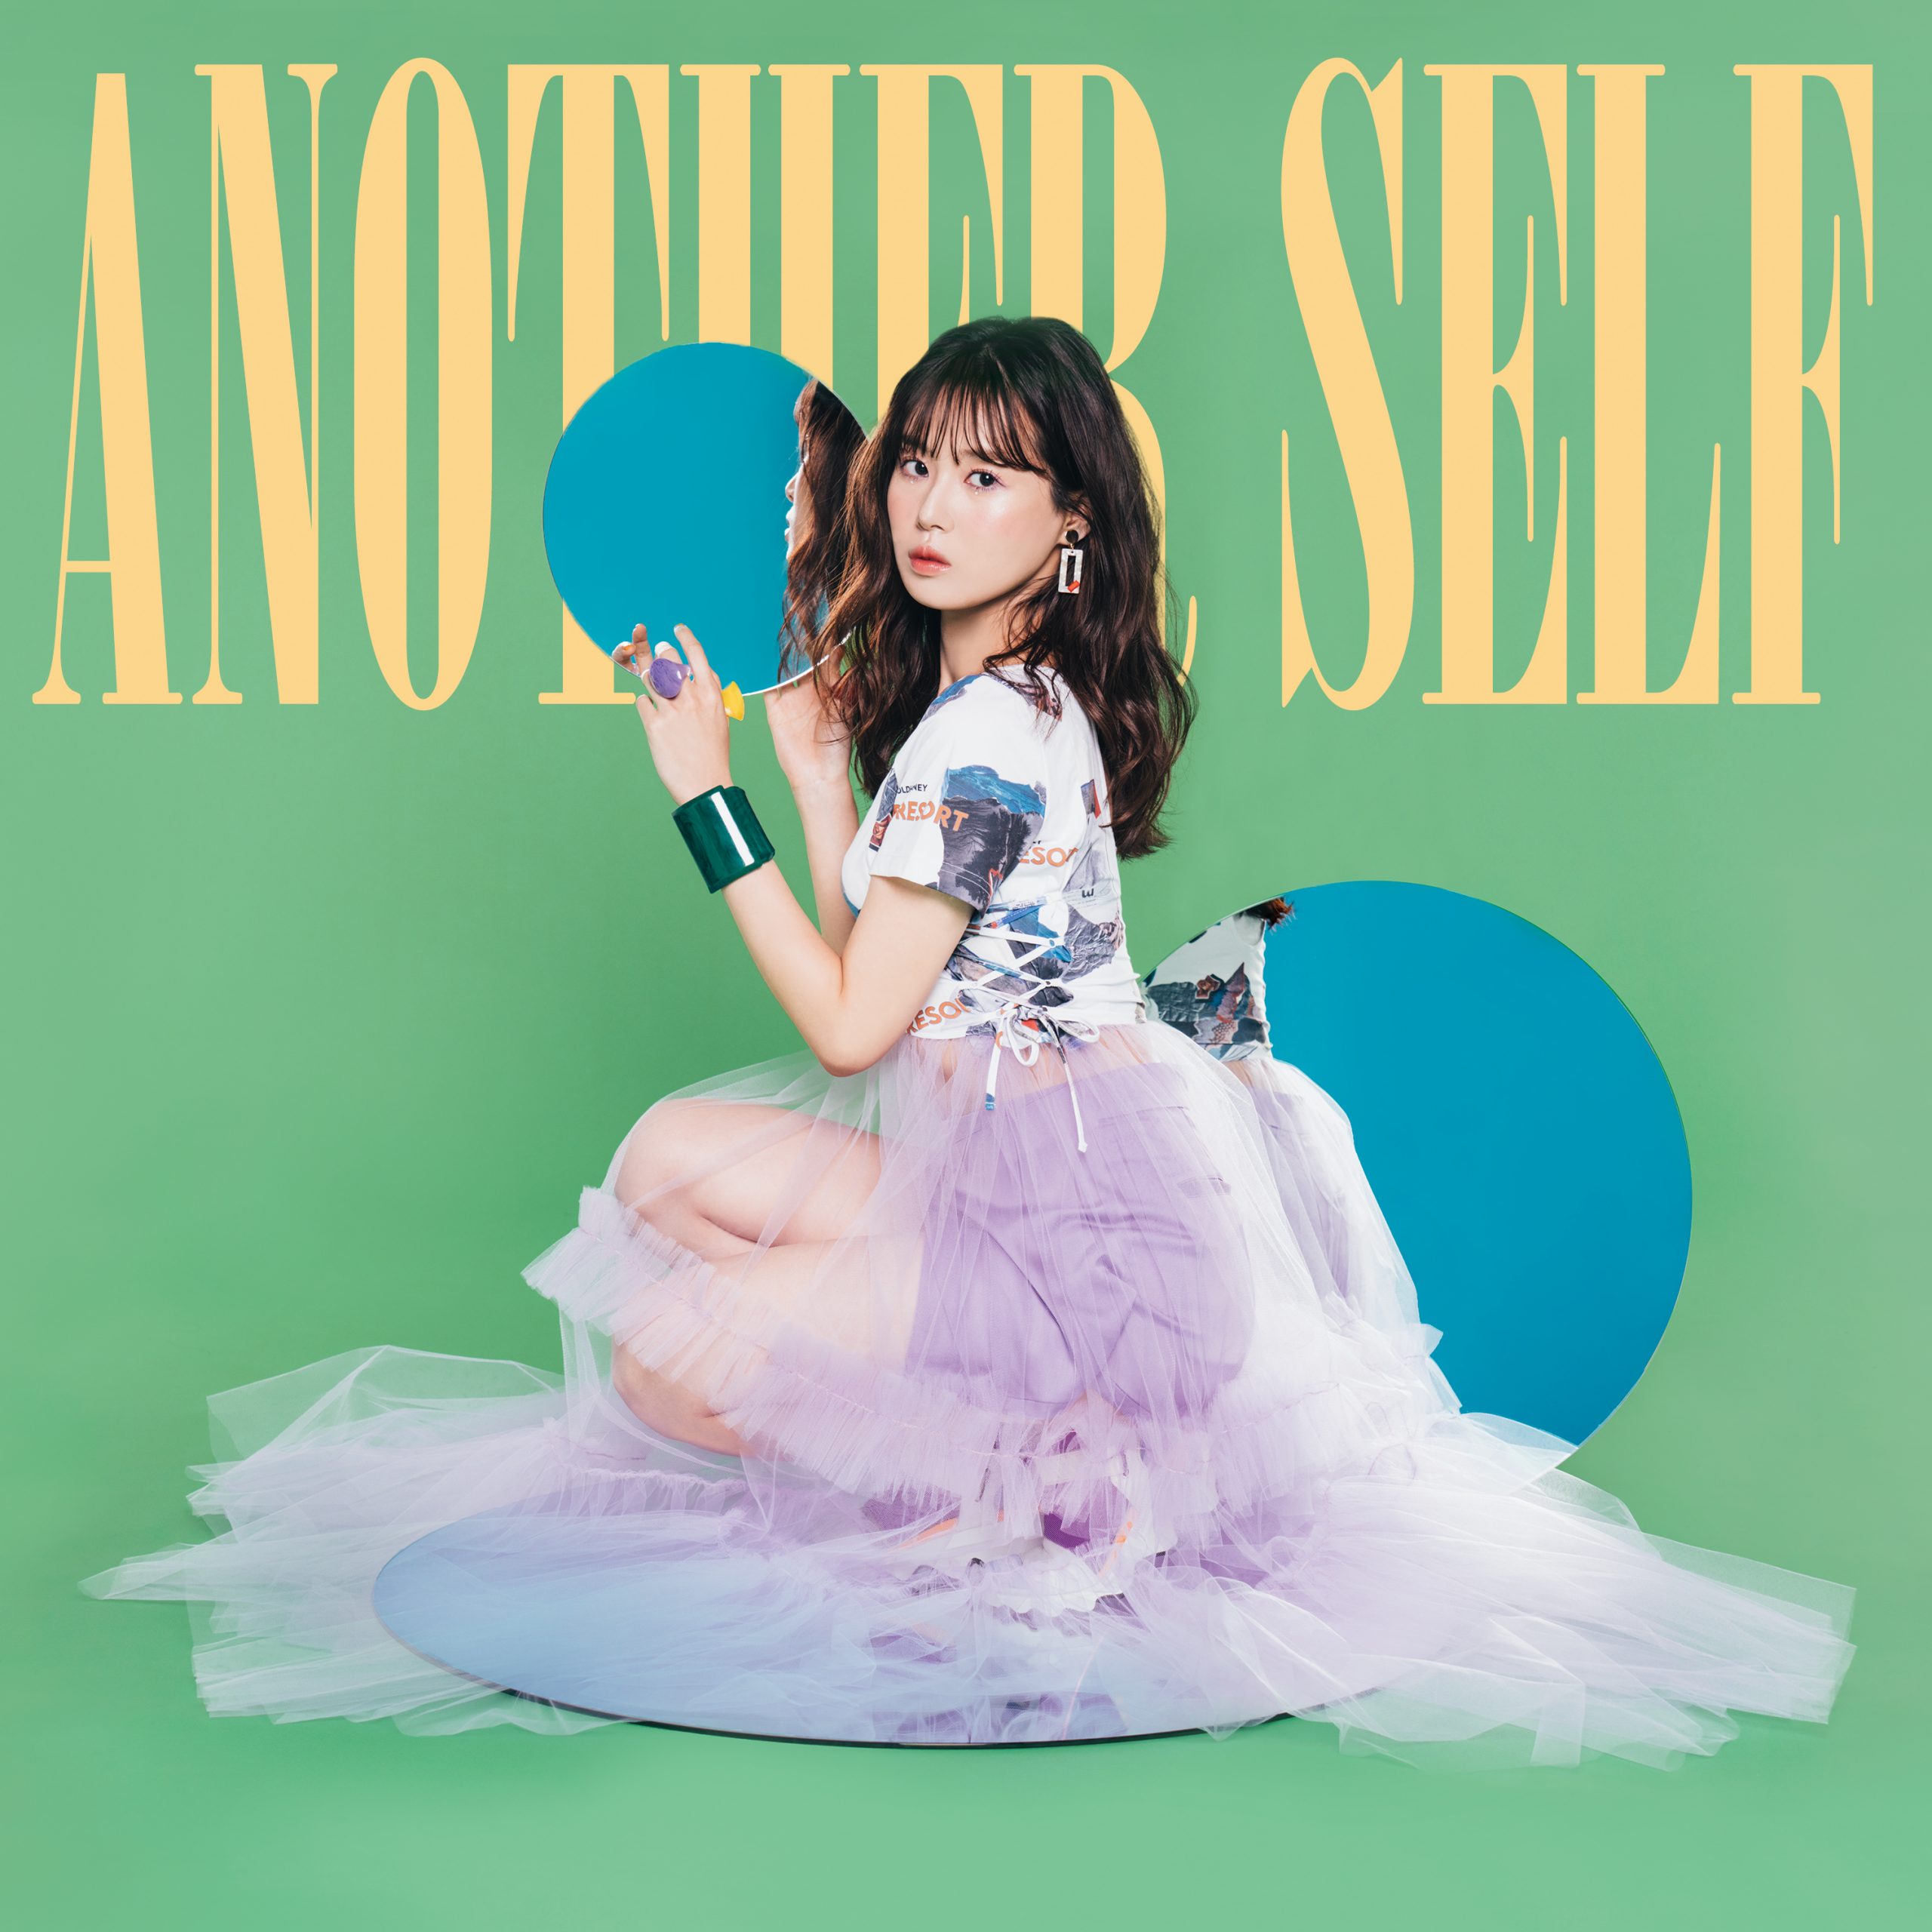 Akane-Kumada-Artist-Photo Akane Kumada Digitally Releases “Another Self,” ED Theme Song for Classroom for Heroes, Along with Themed Music Video of Searching for Friends!